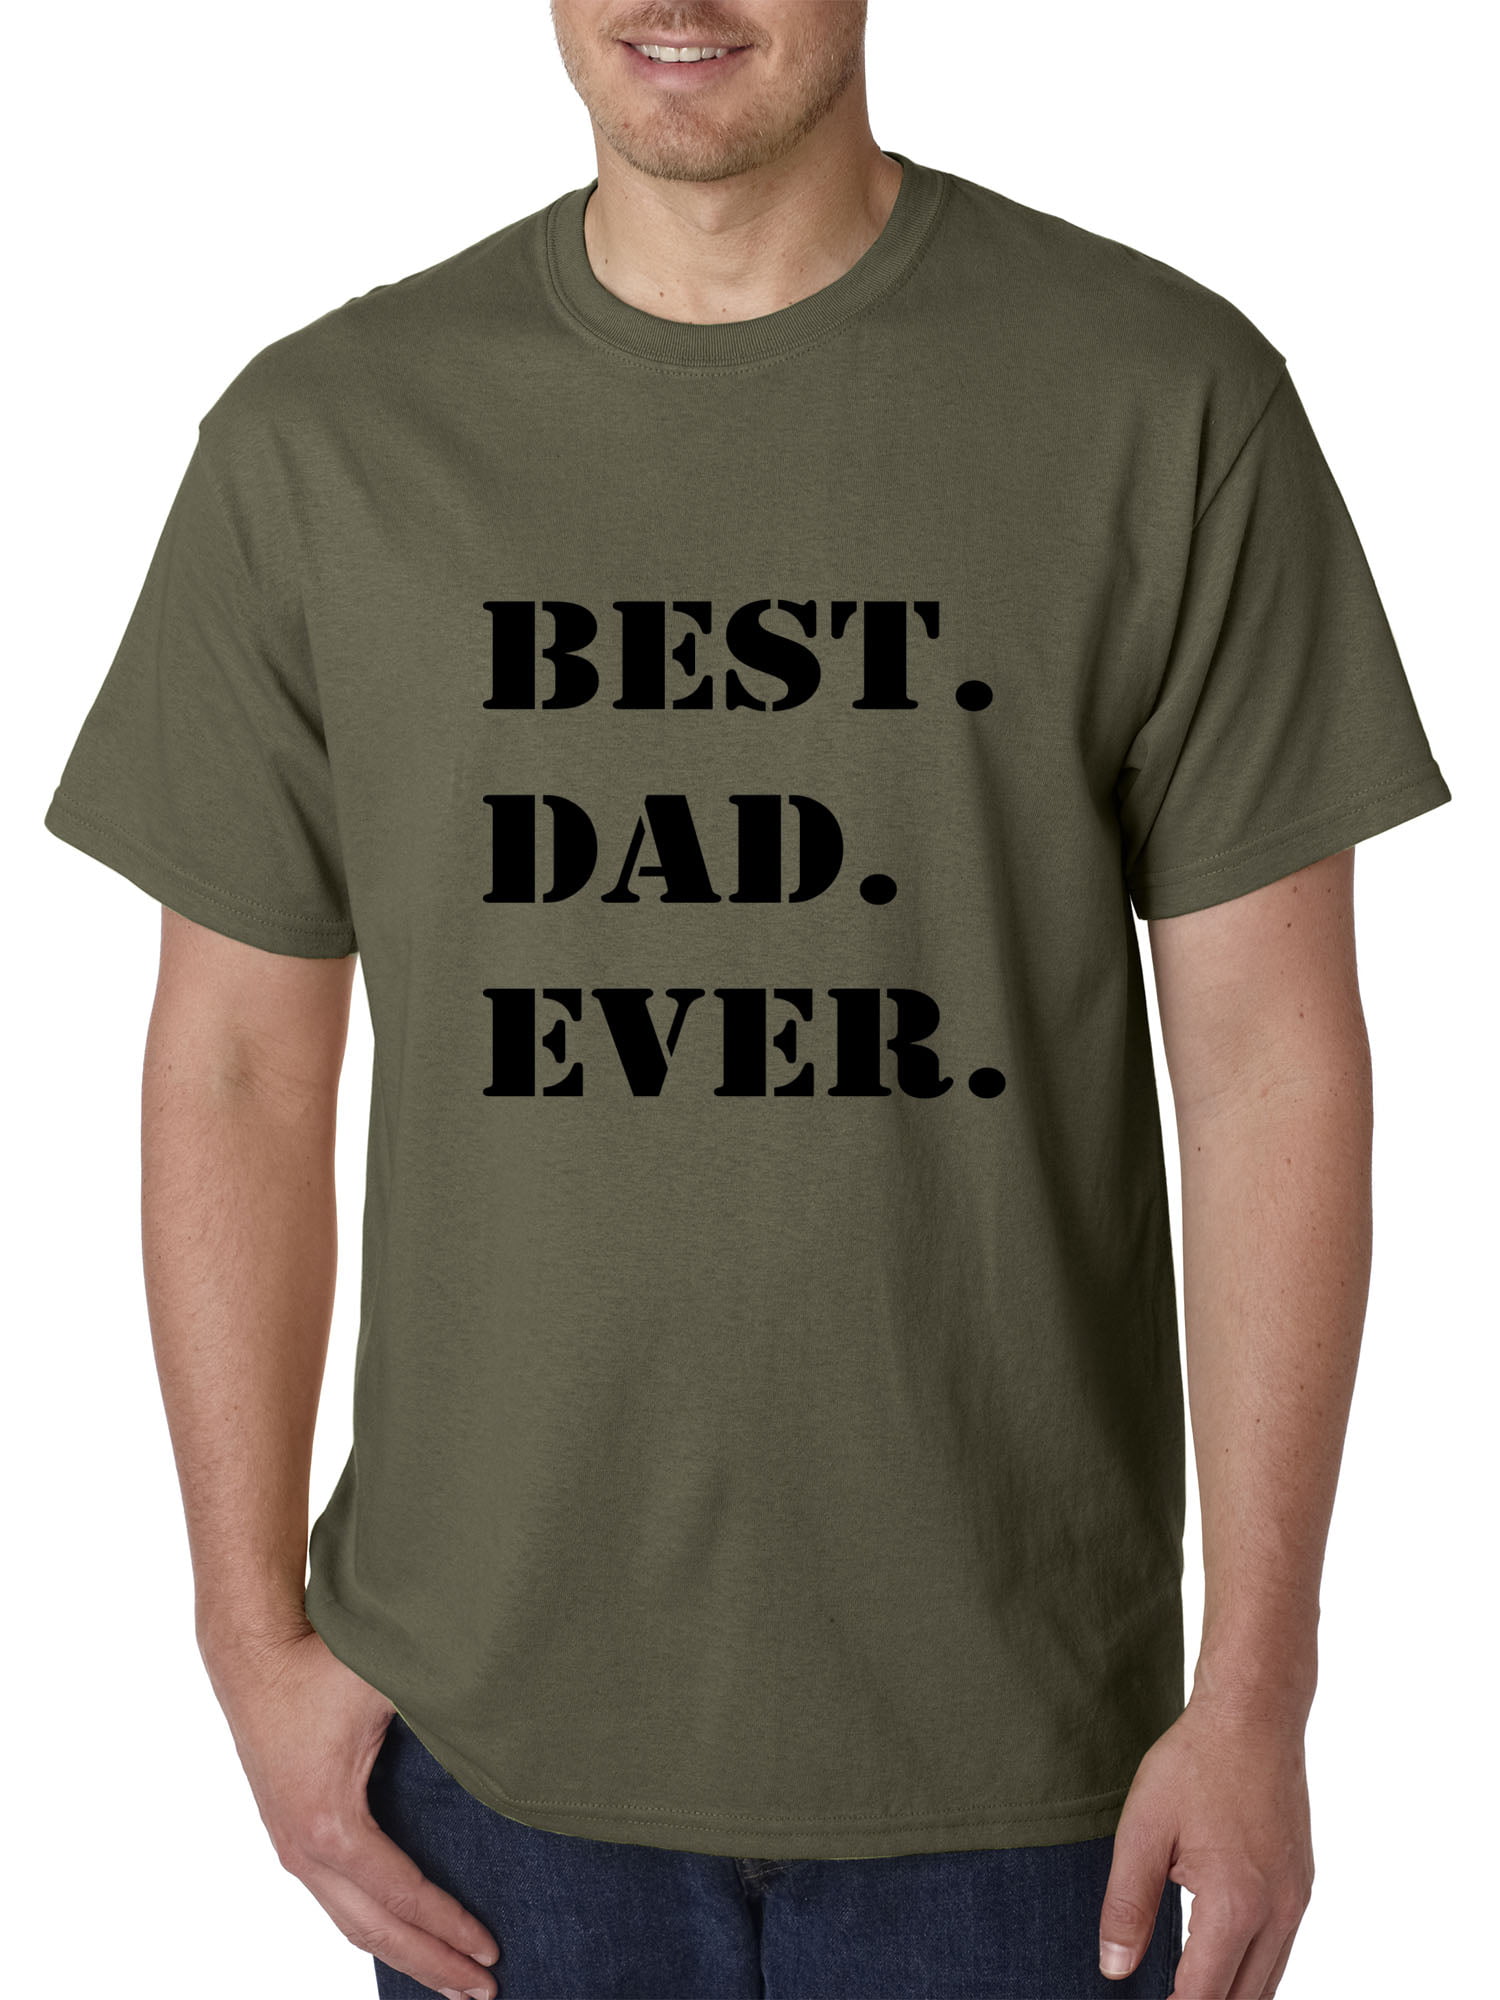 Details about   Daddy Son T shirts Fathers Day Gift Father Baby Funny Christmas Matching Tees